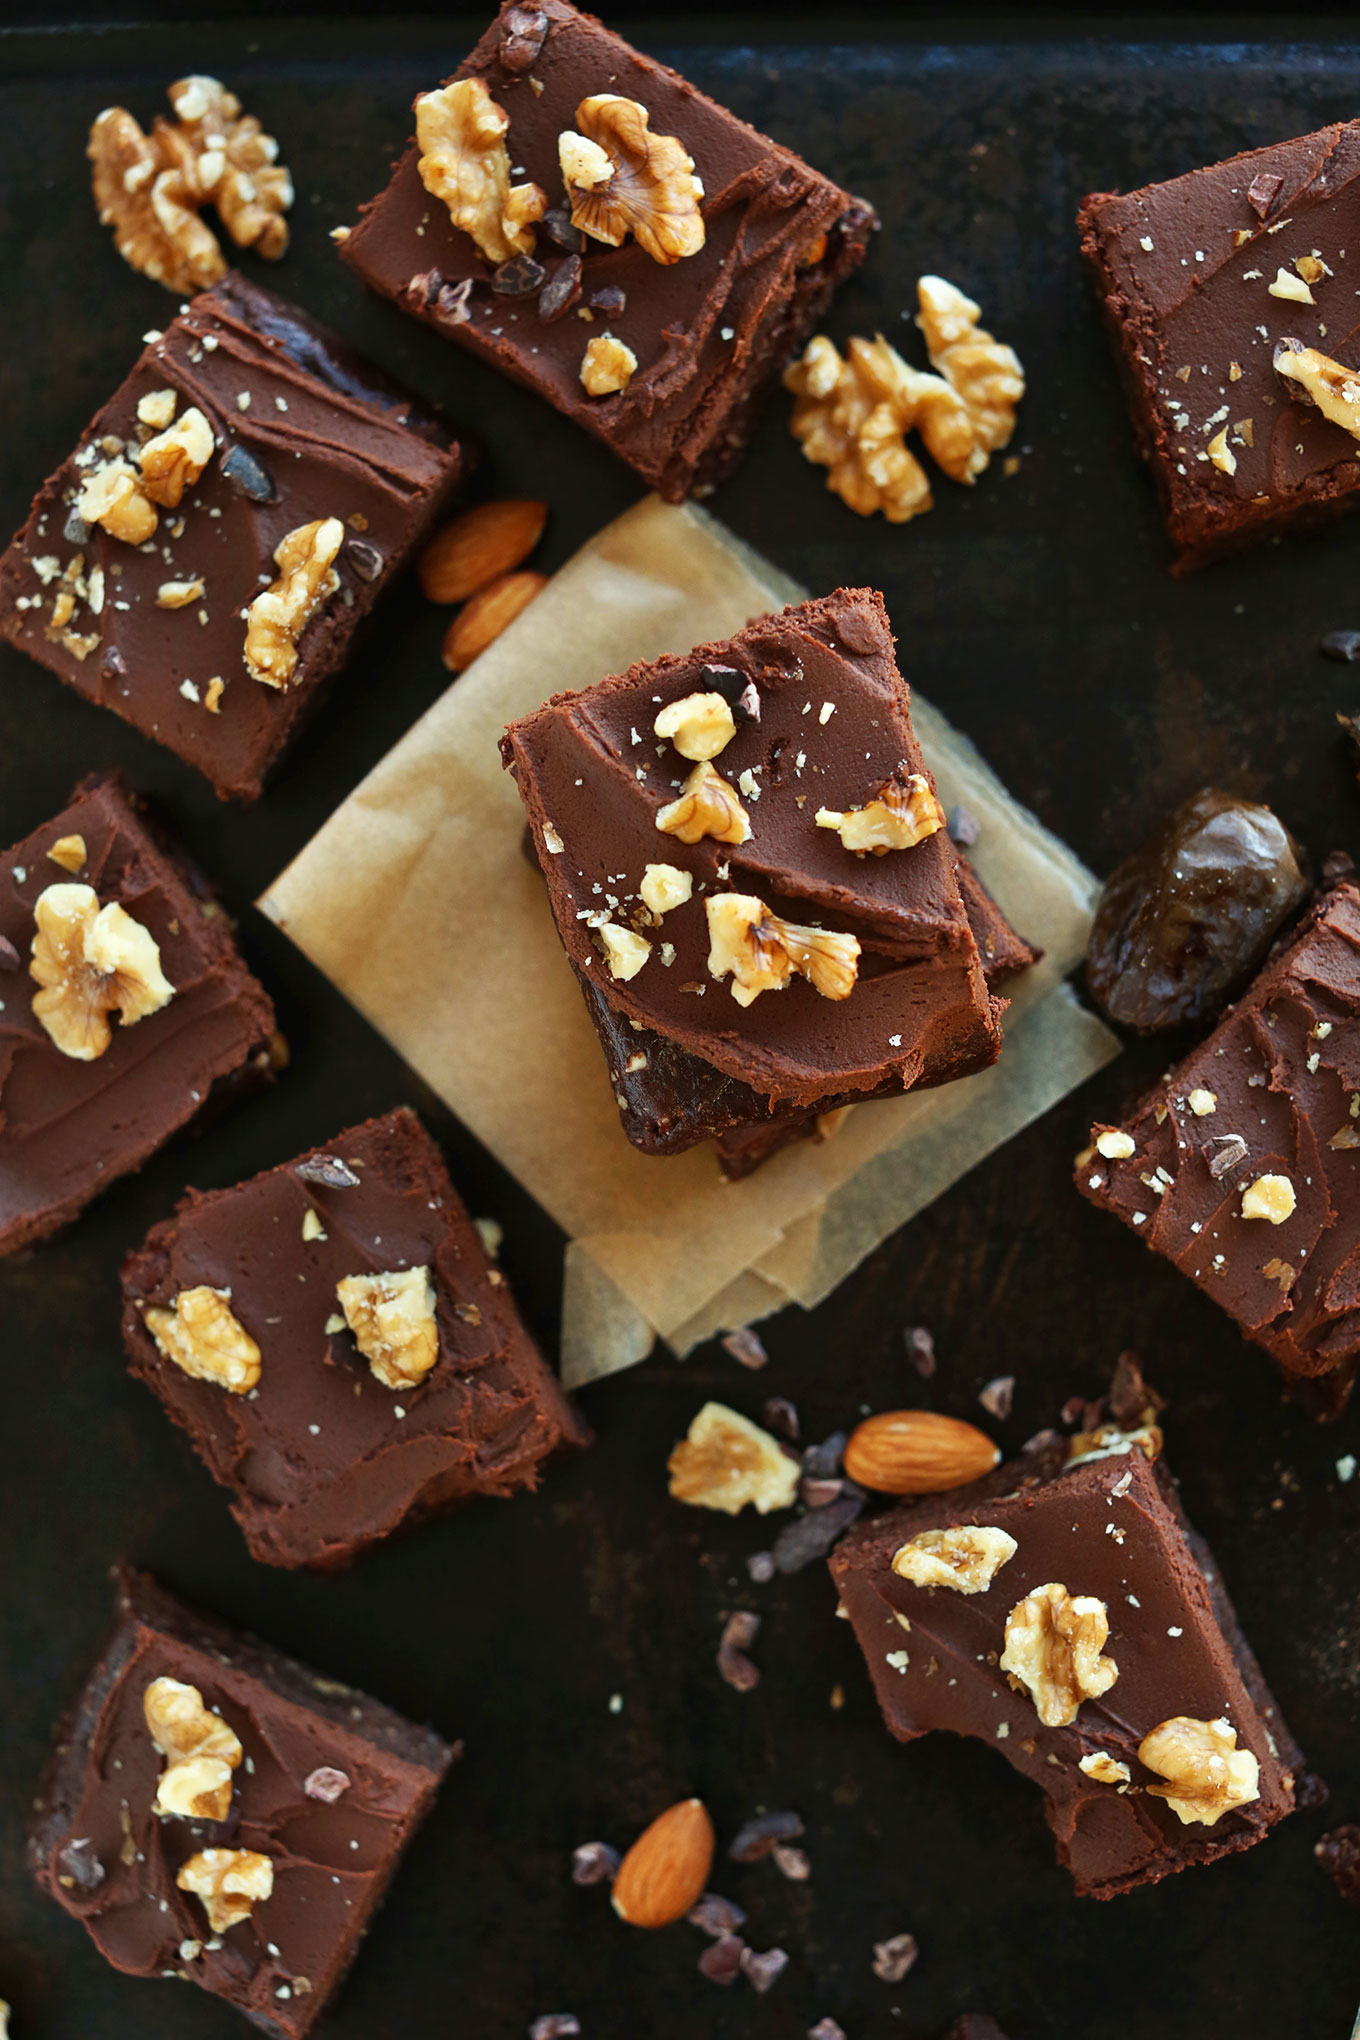 Squares of our delicious dessert recipe of Raw Vegan Brownies with Chocolate Ganache